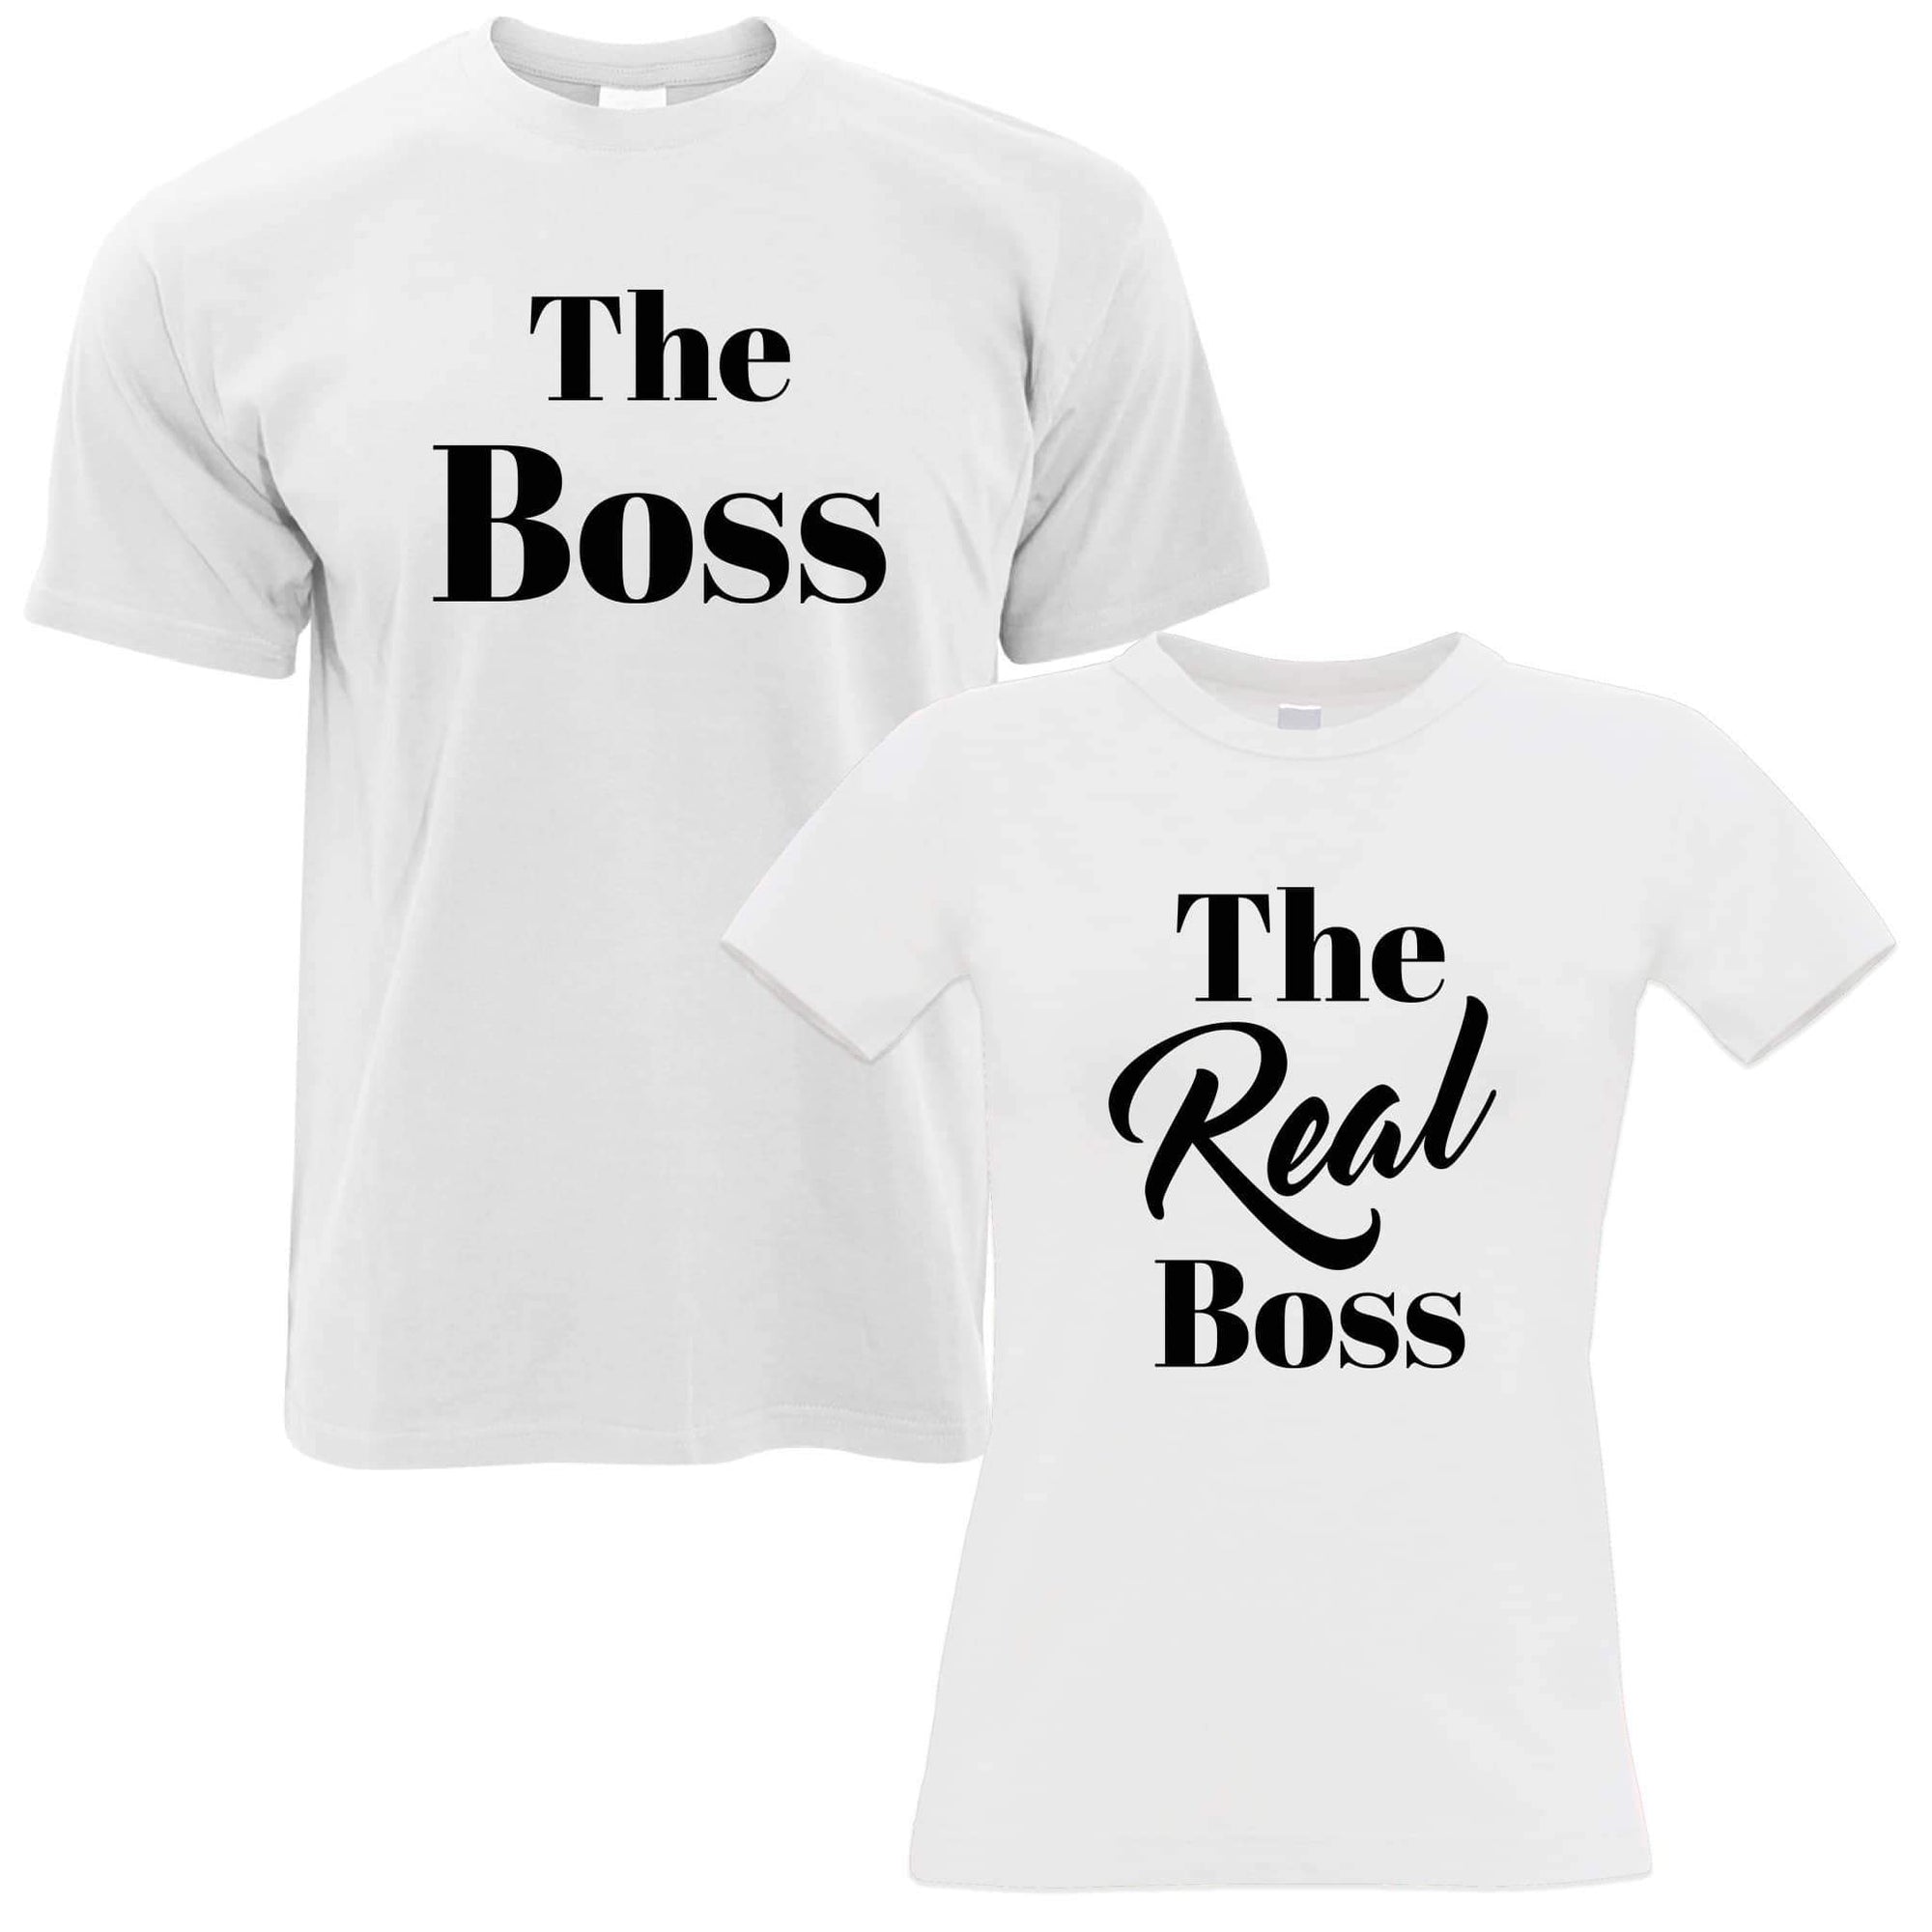 the boss and the real boss shirts